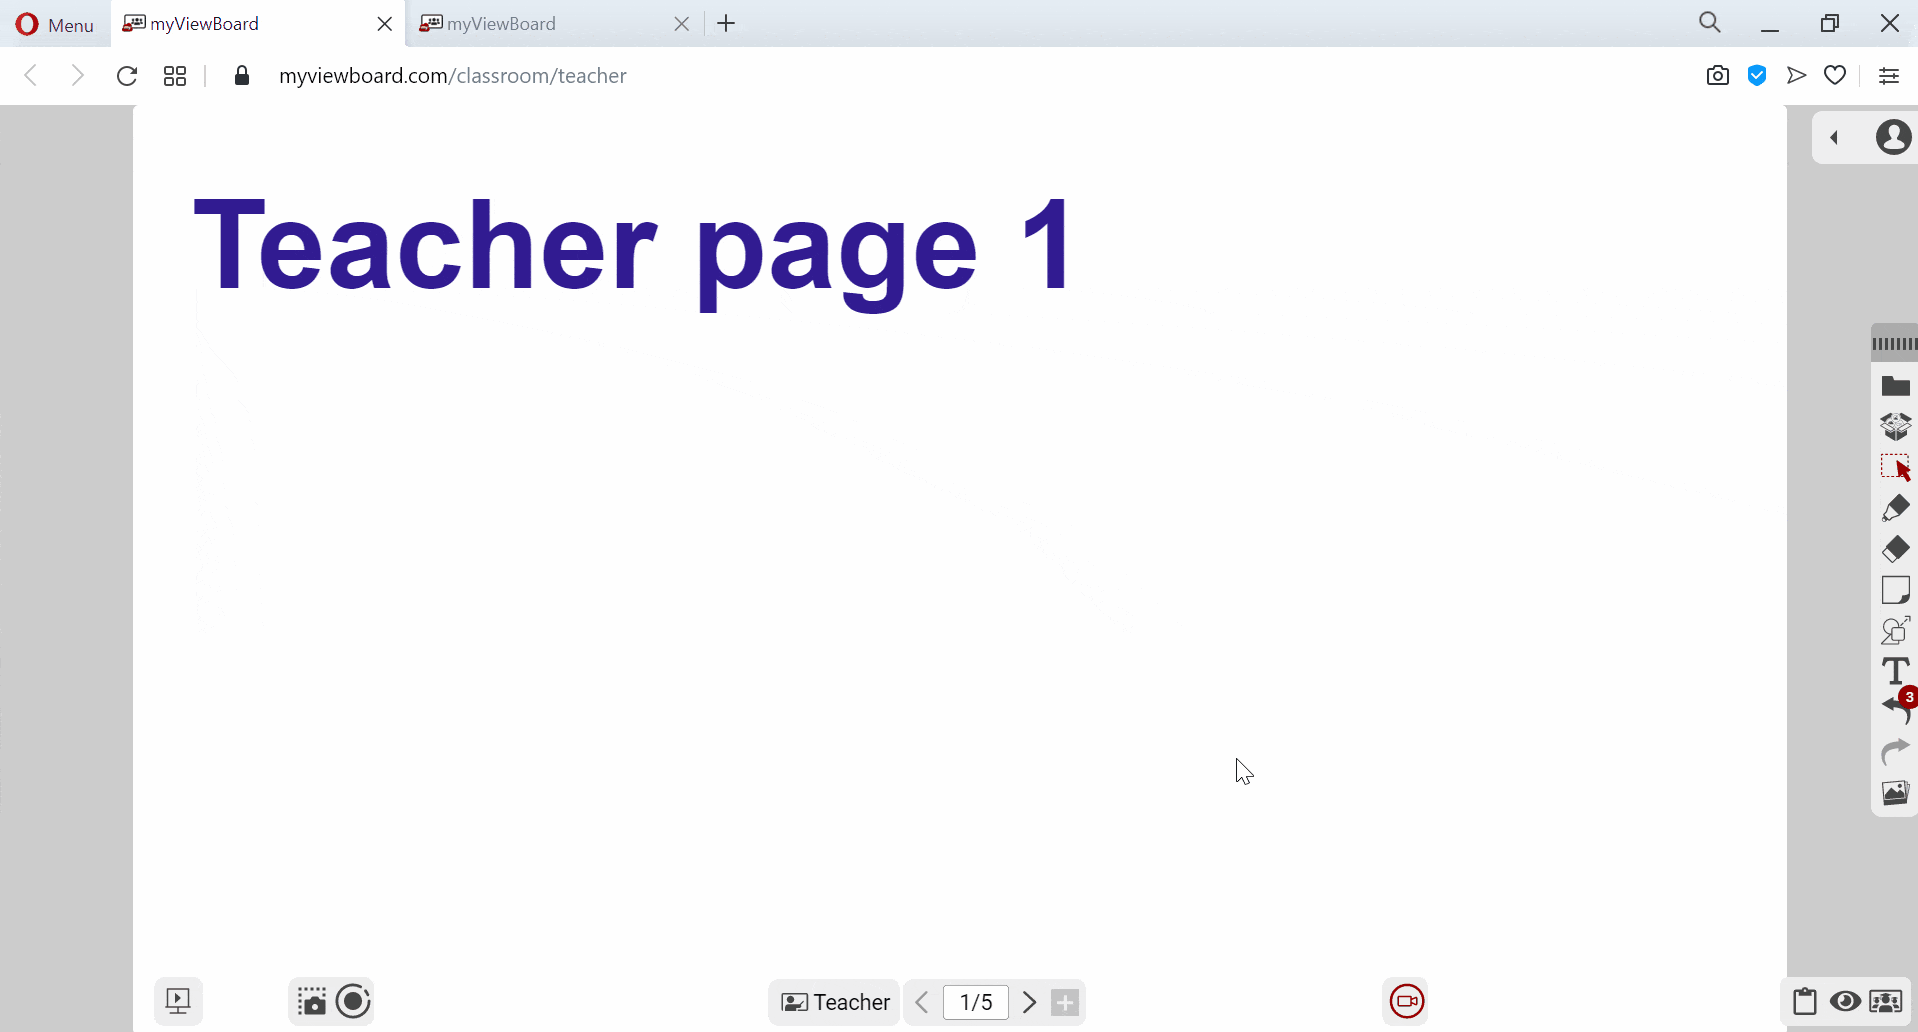 Click the icons at the bottom to overview pages for teacher and huddle pages